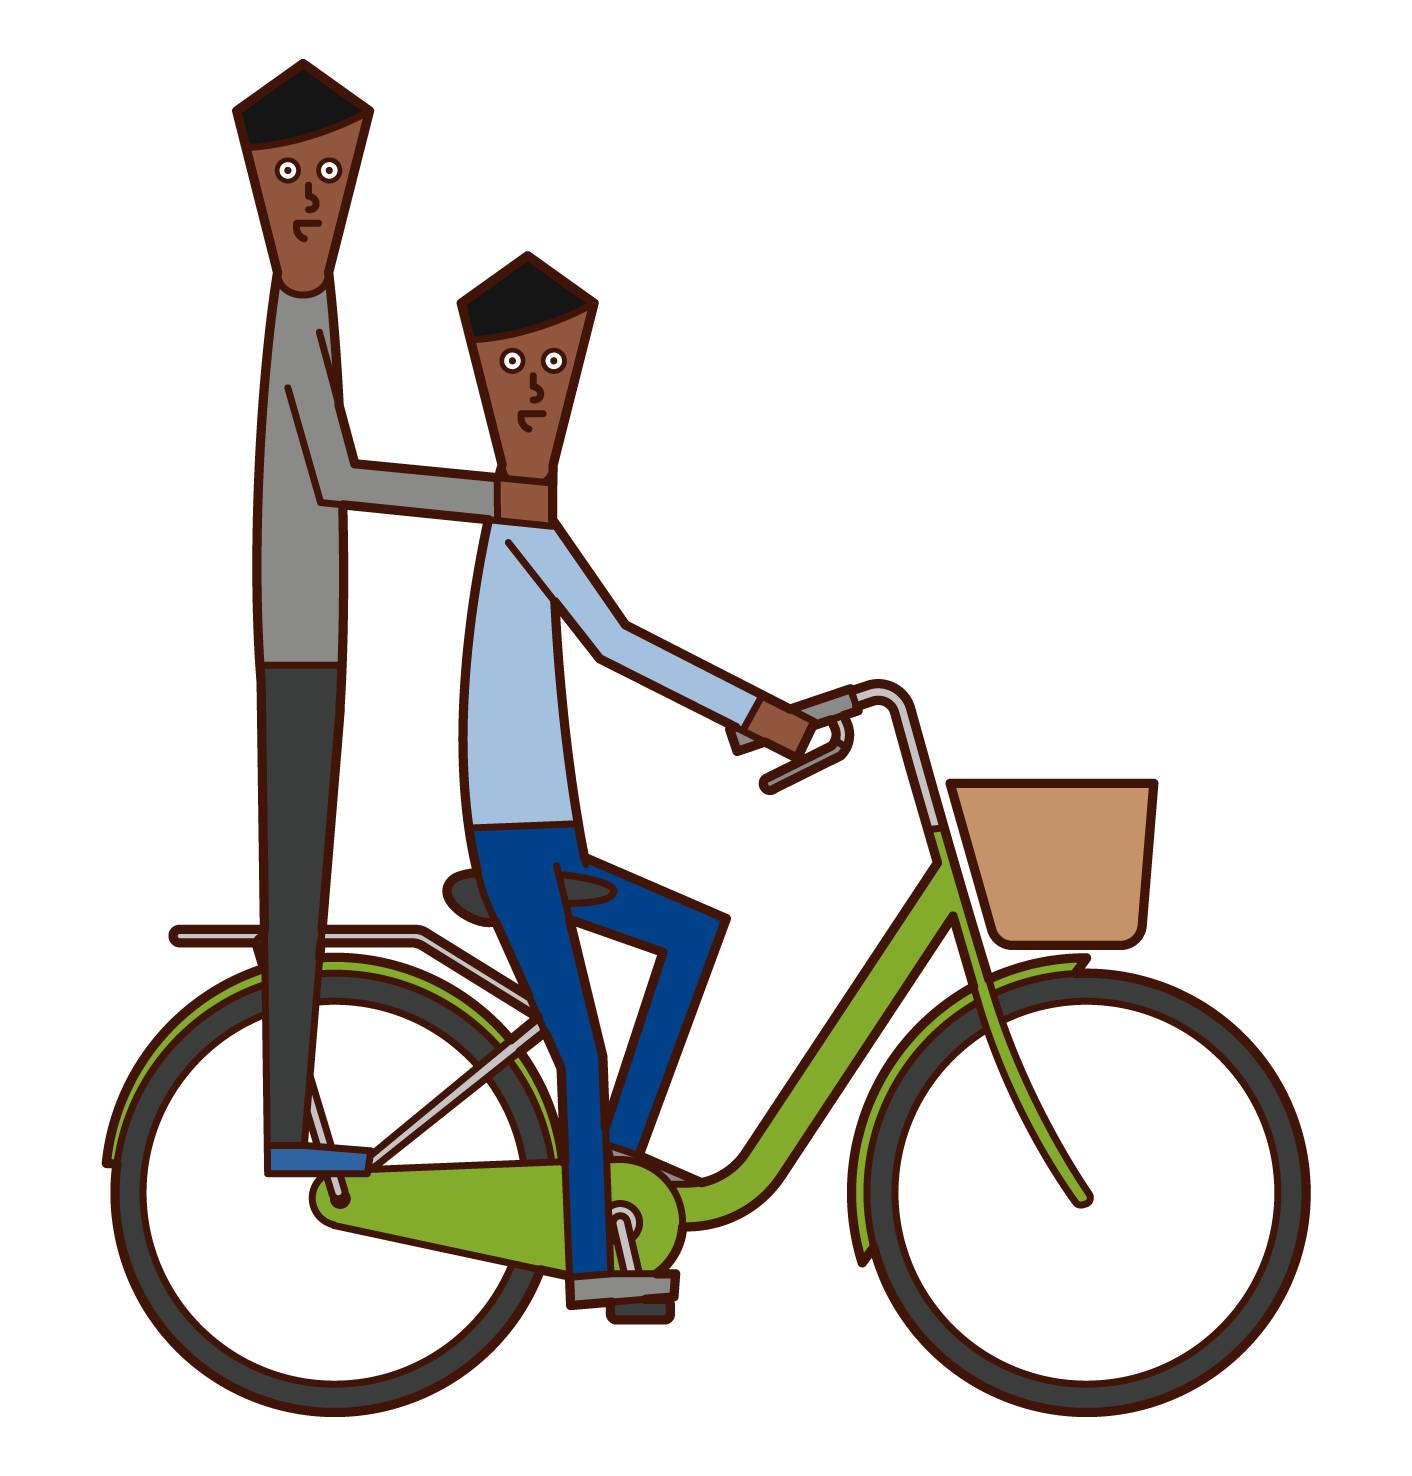 Illustration of two people riding a bicycle